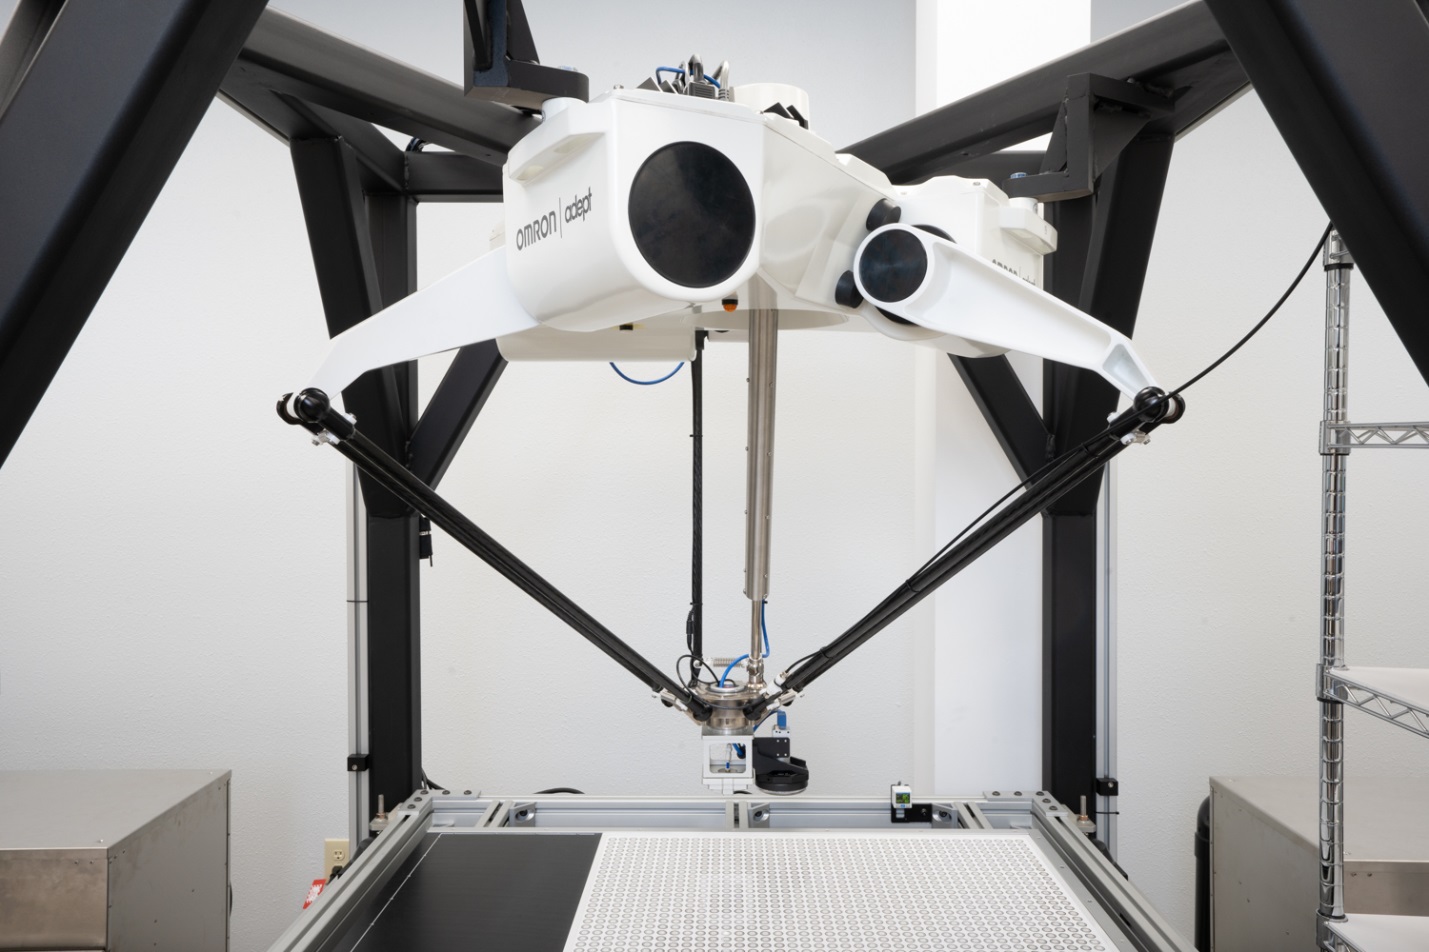 Most of the mass of a delta robot (painted white, above) is rigidly mounted to the top of a frame. Because the arms that hang down have very little mass (black, above), they can move exceptionally quickly. Delta robots are ideal for moving light loads at fast speeds.